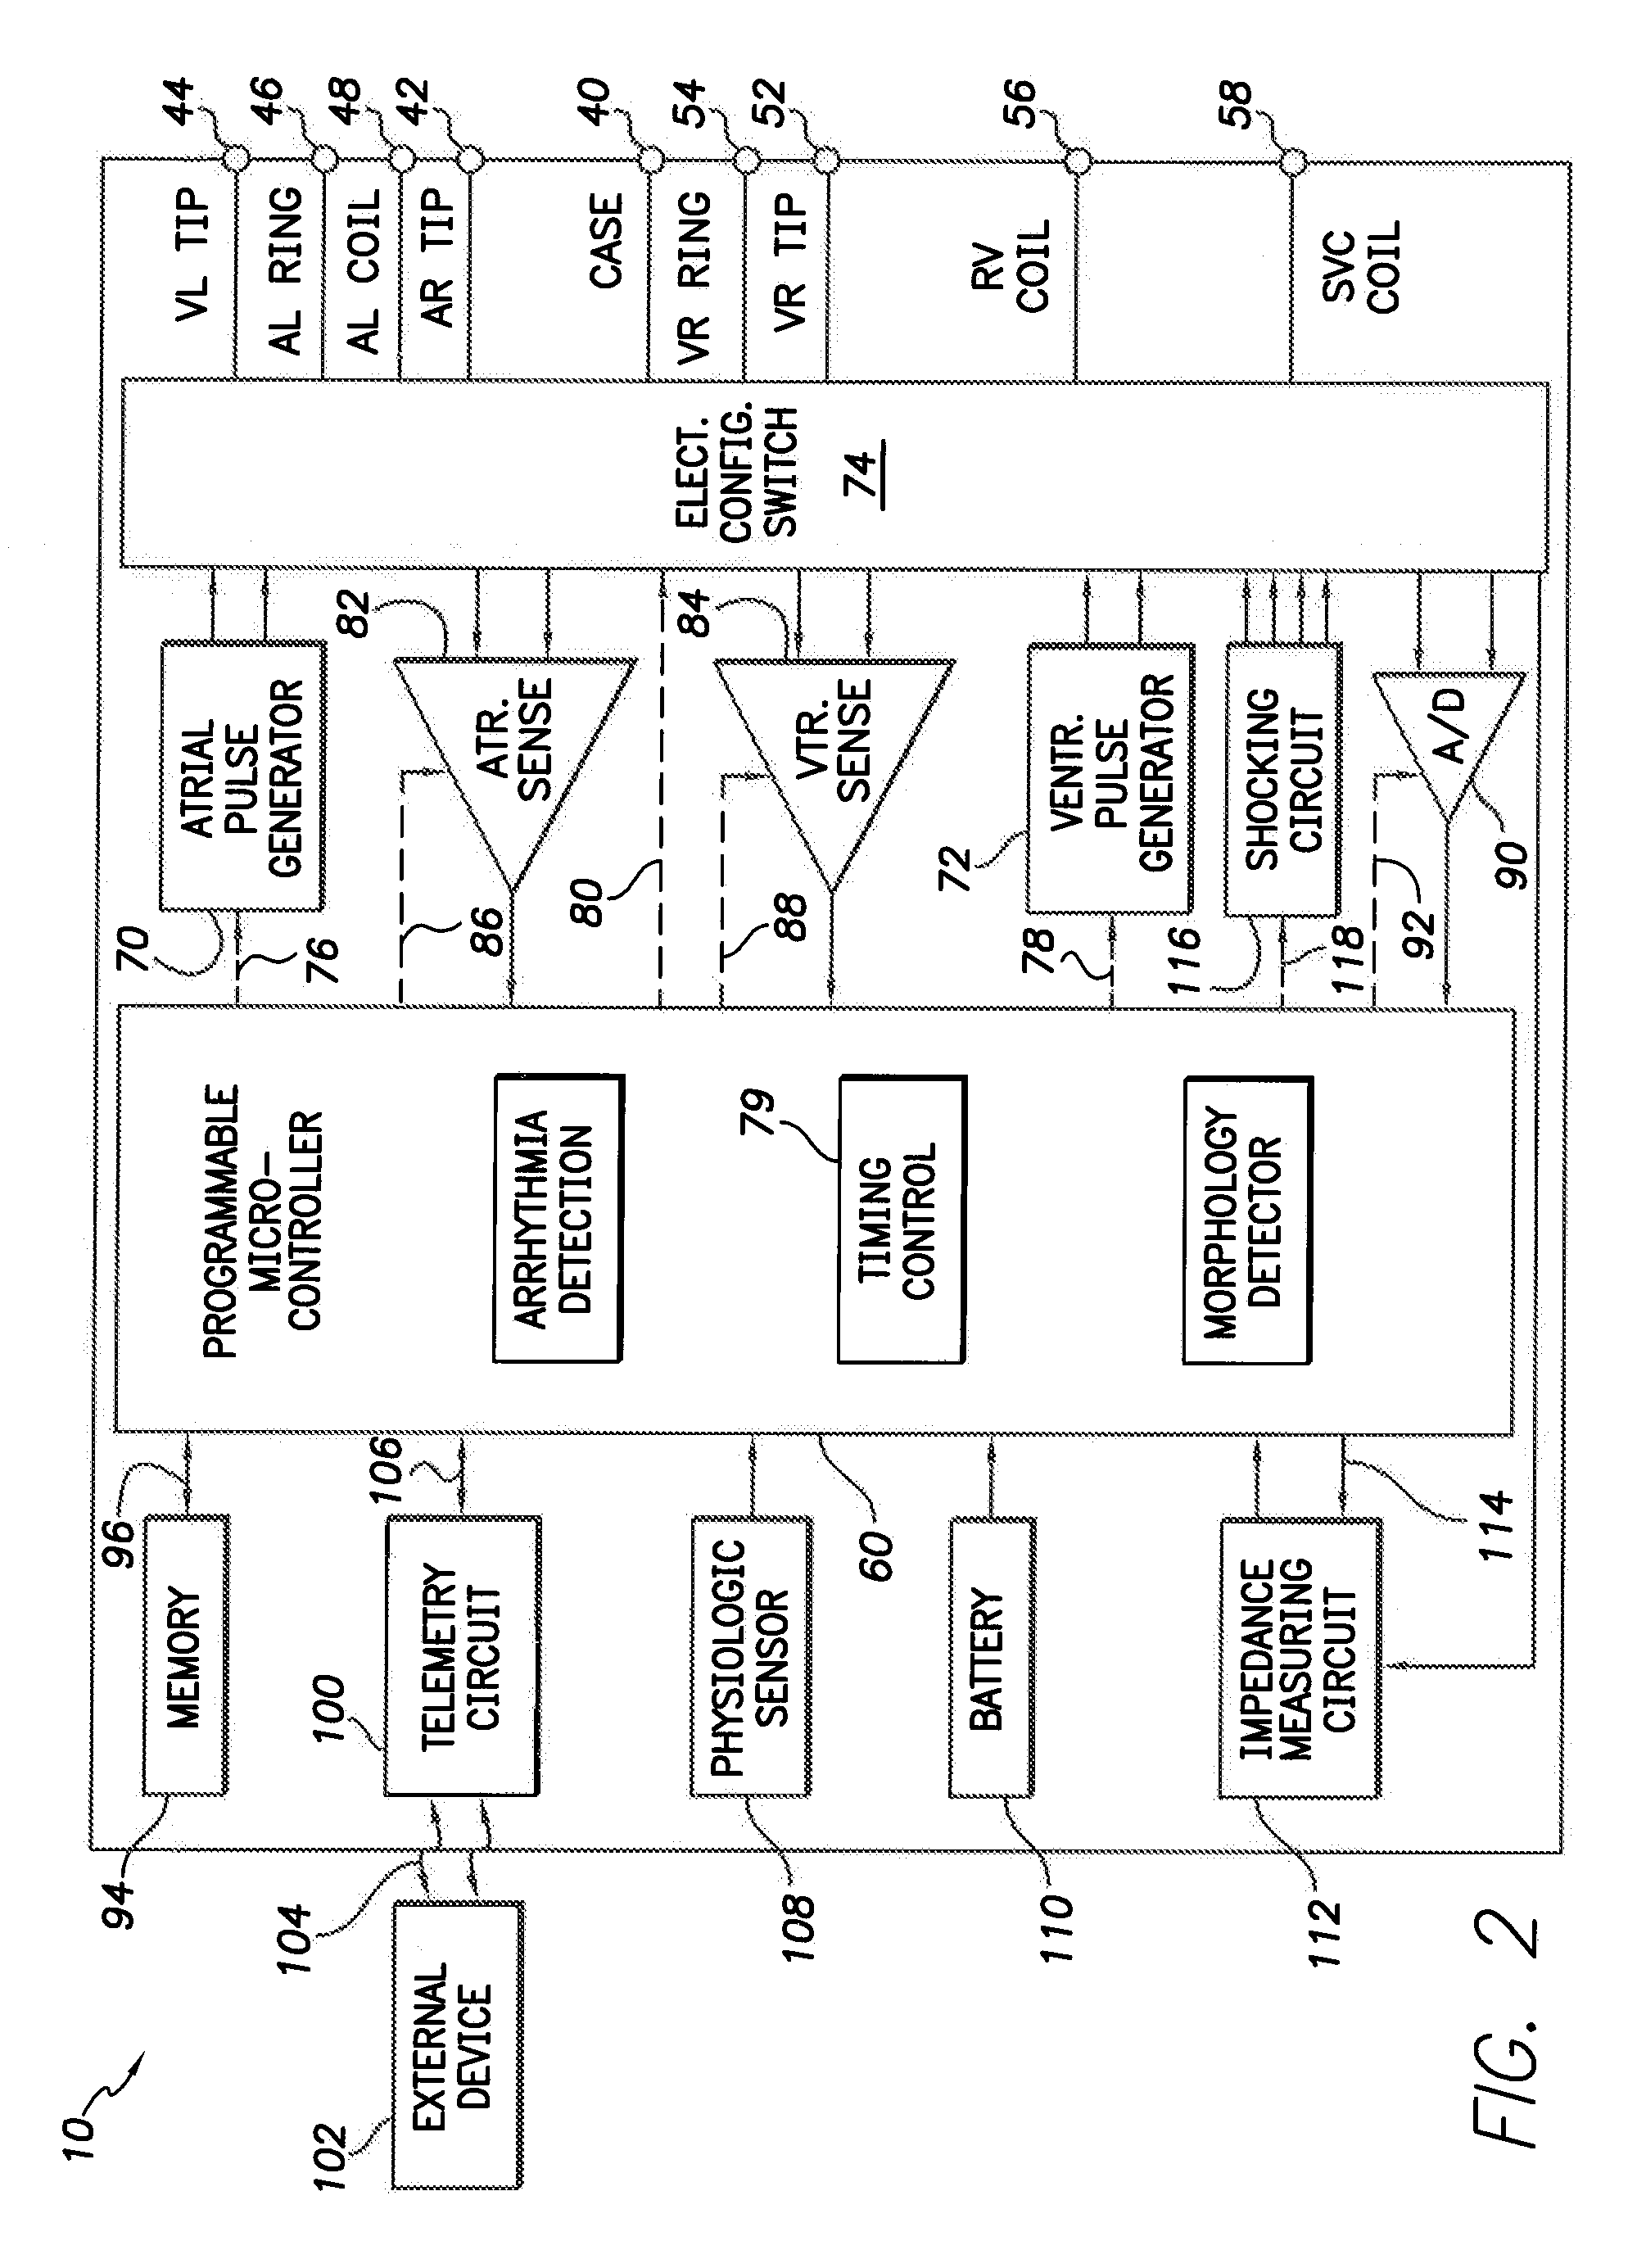 Capacitor-integrated feedthrough assembly with improved grounding for an implantable medical device